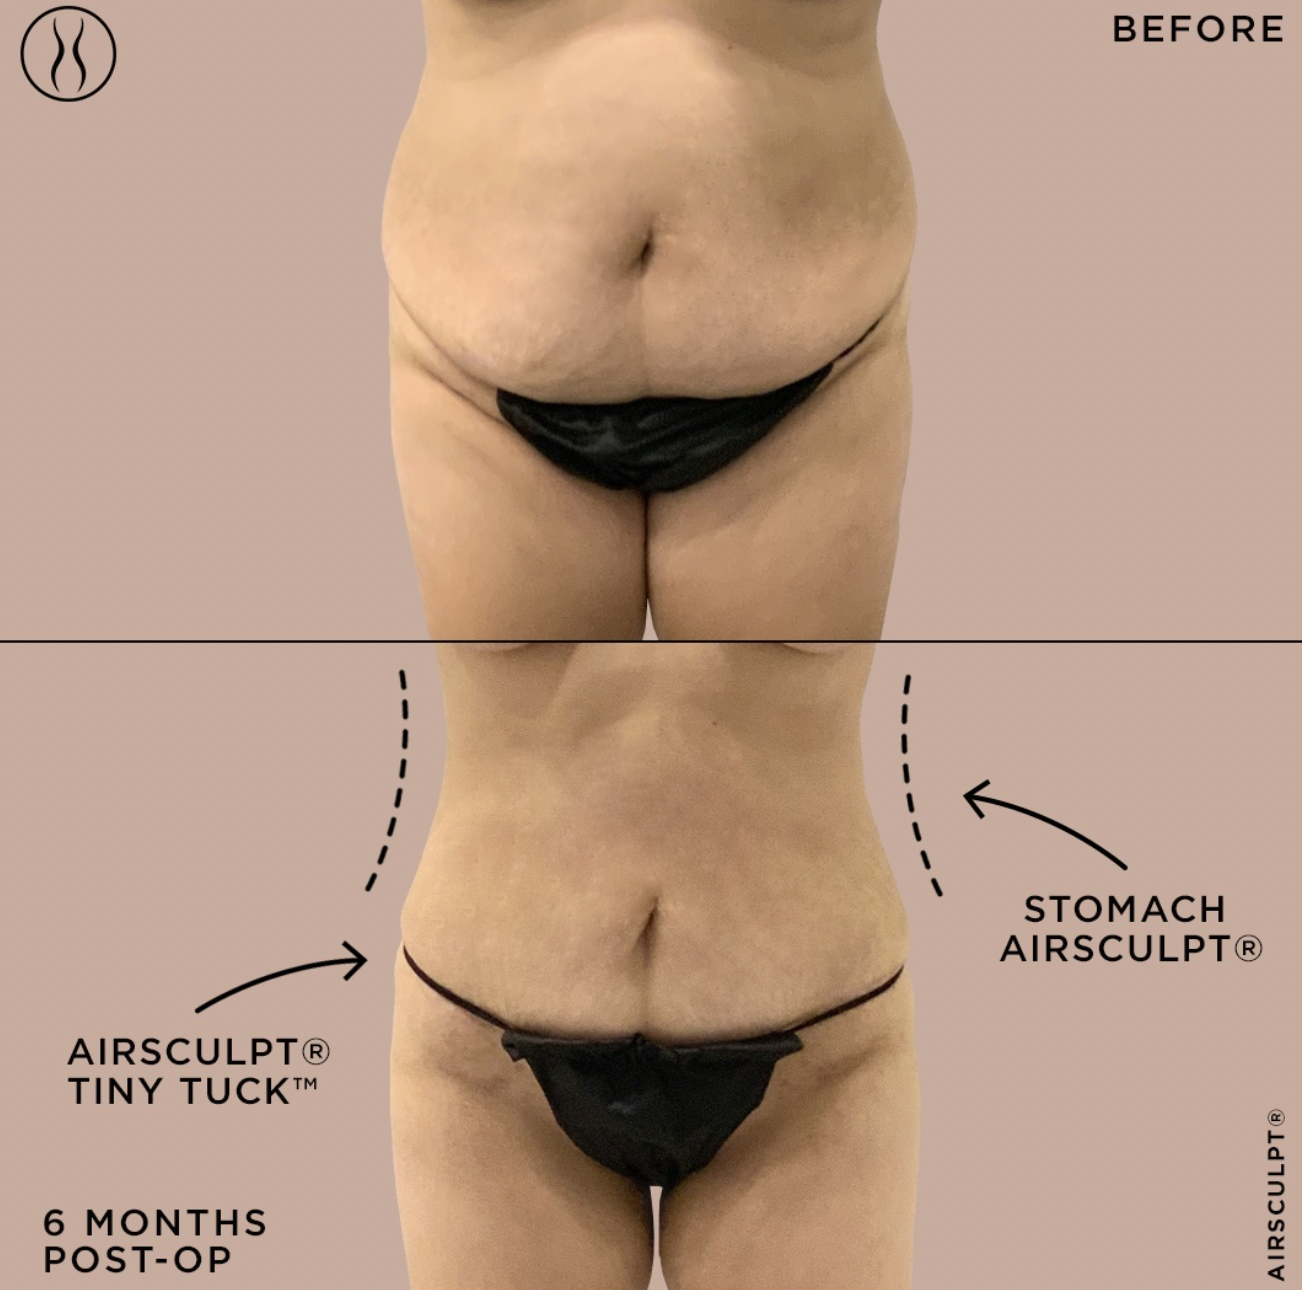 How to Get Rid of the Muffin Top: Exercises and Surgical Alternatives